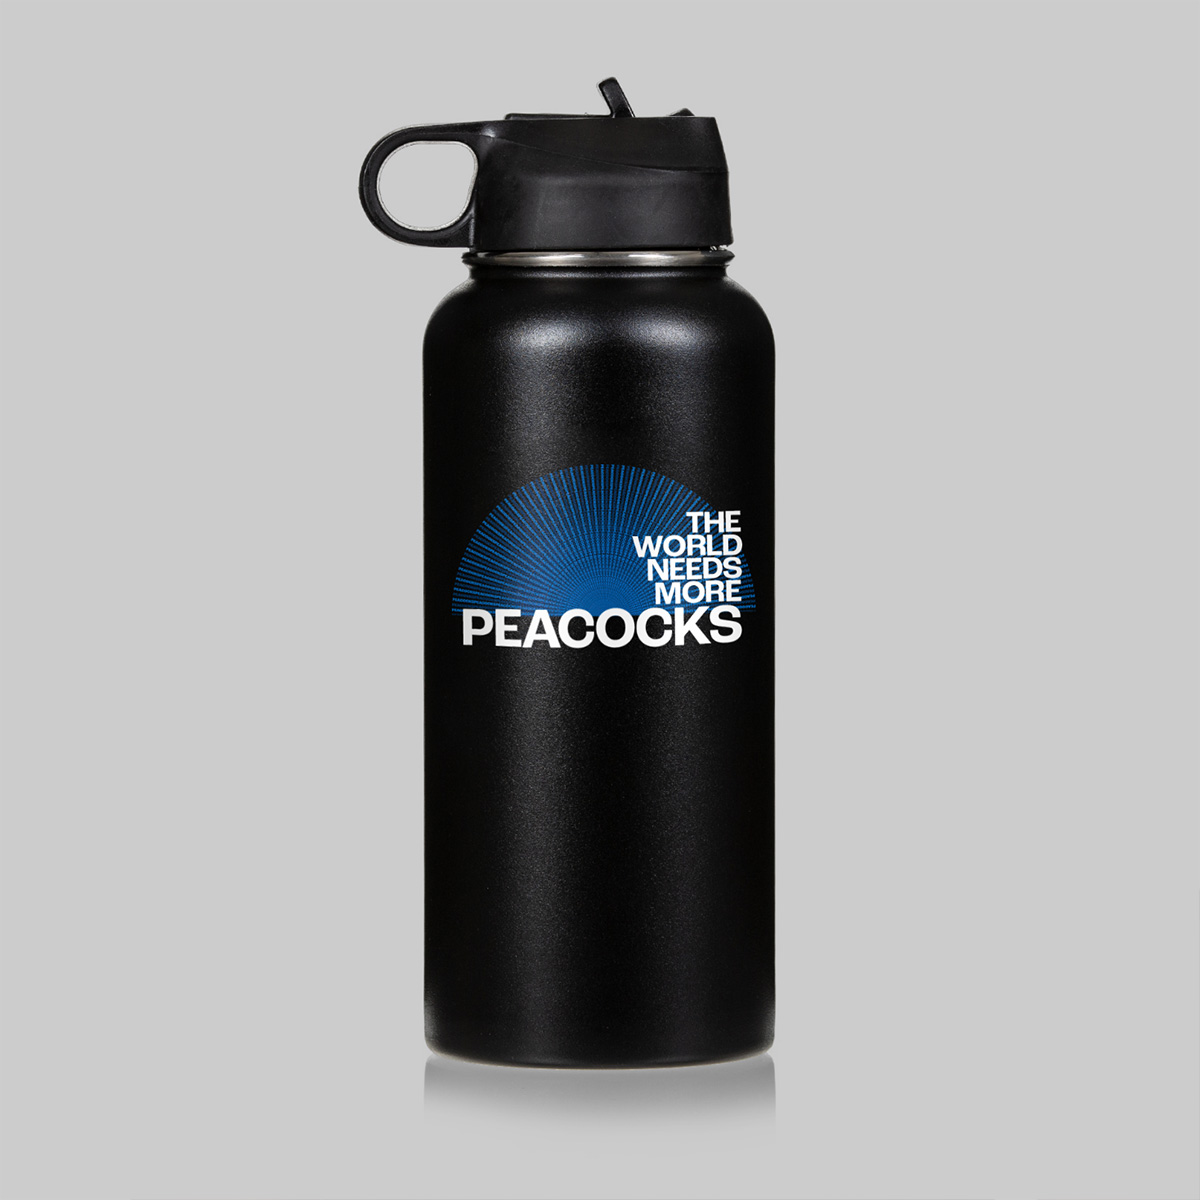 The World Needs More Peacocks water bottle